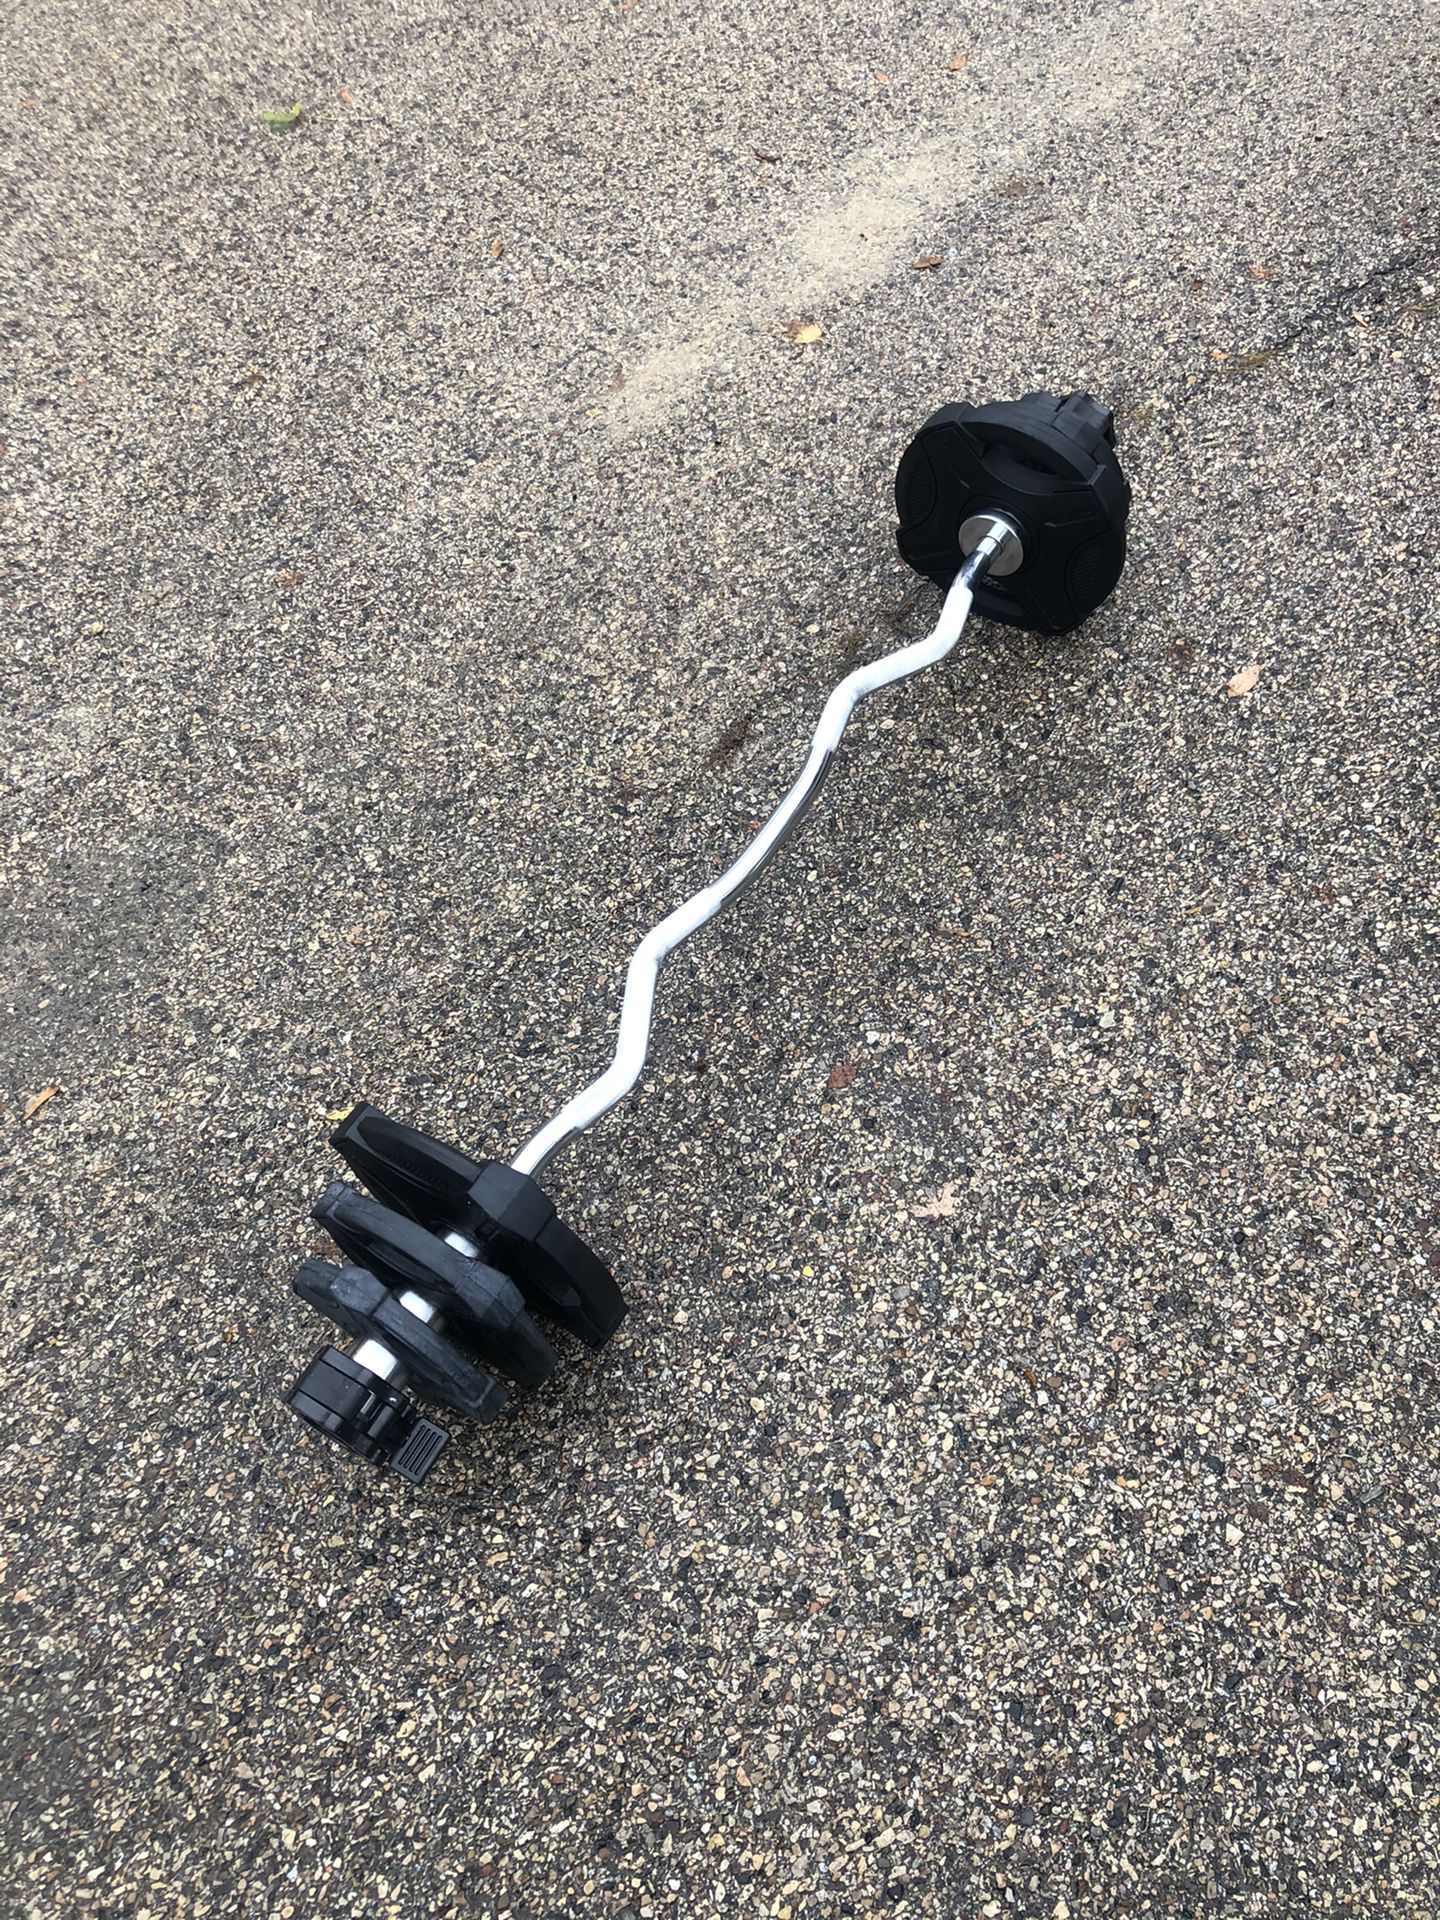 Olympic curl bar and weights